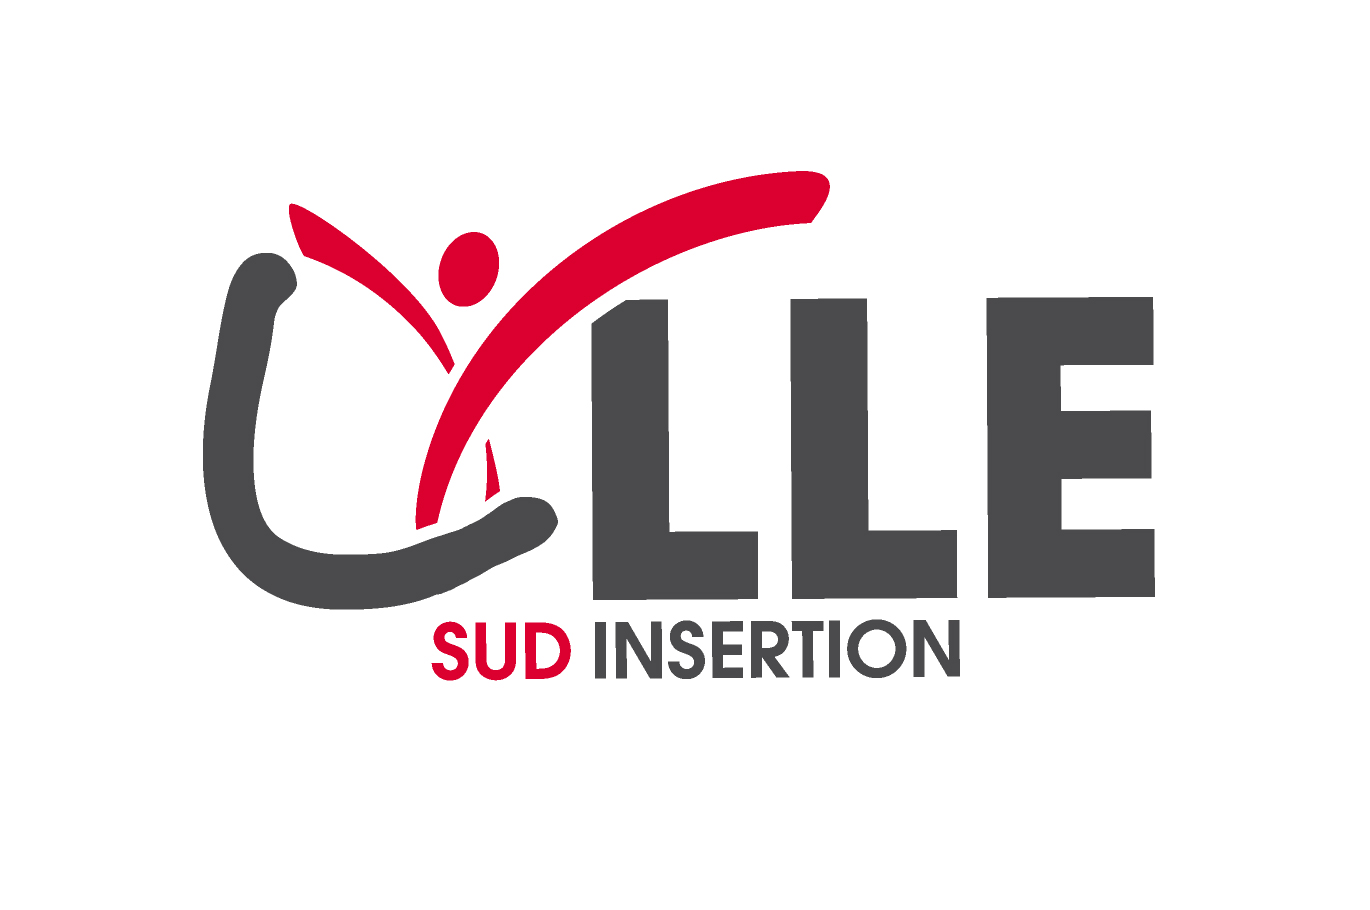 Lille Sud Insertion